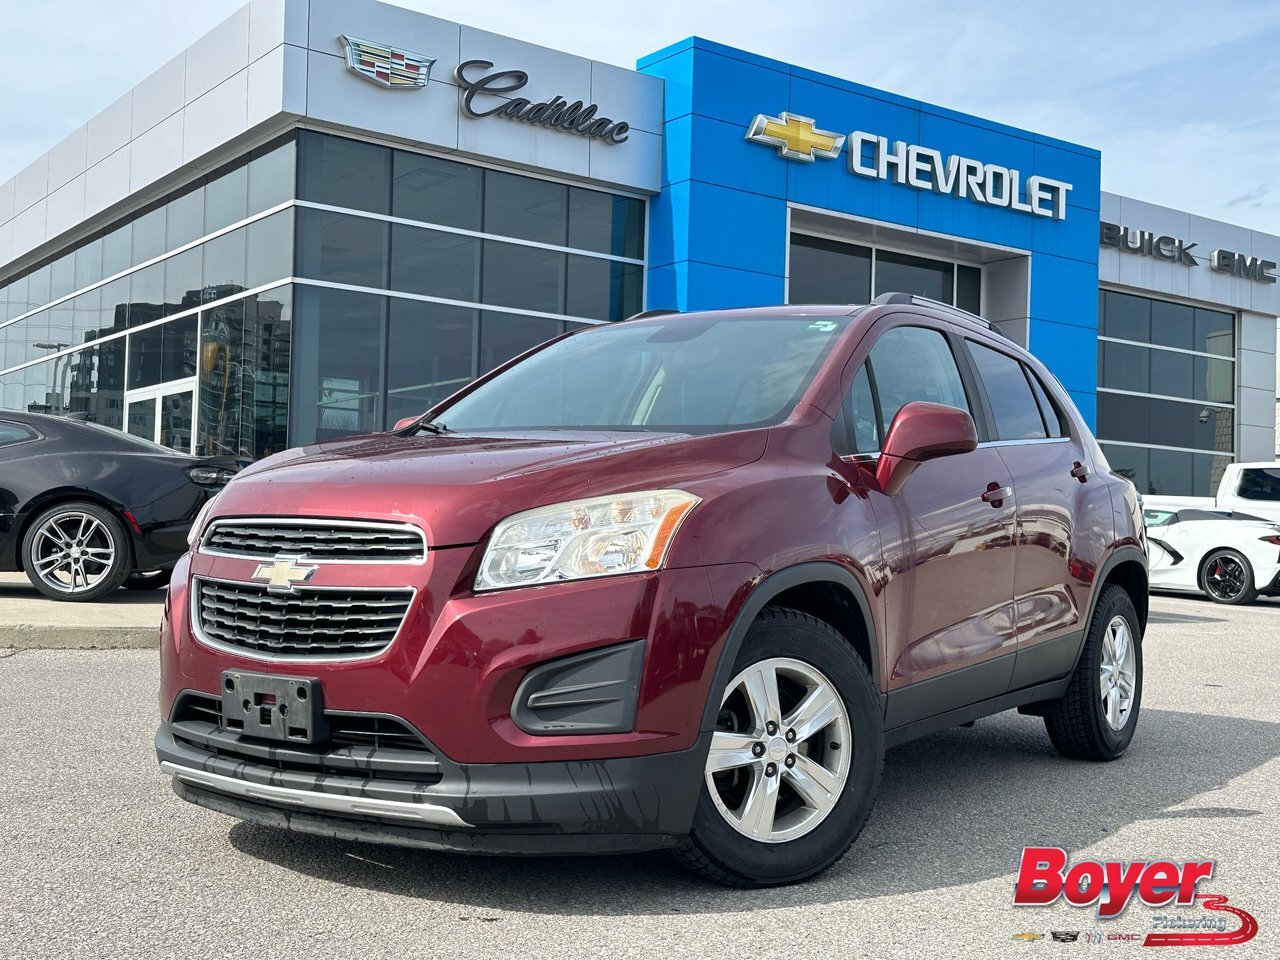 2014 Chevrolet Trax LT BOSE SOUND|REAR ASSIST|GREAT VALUE! / 